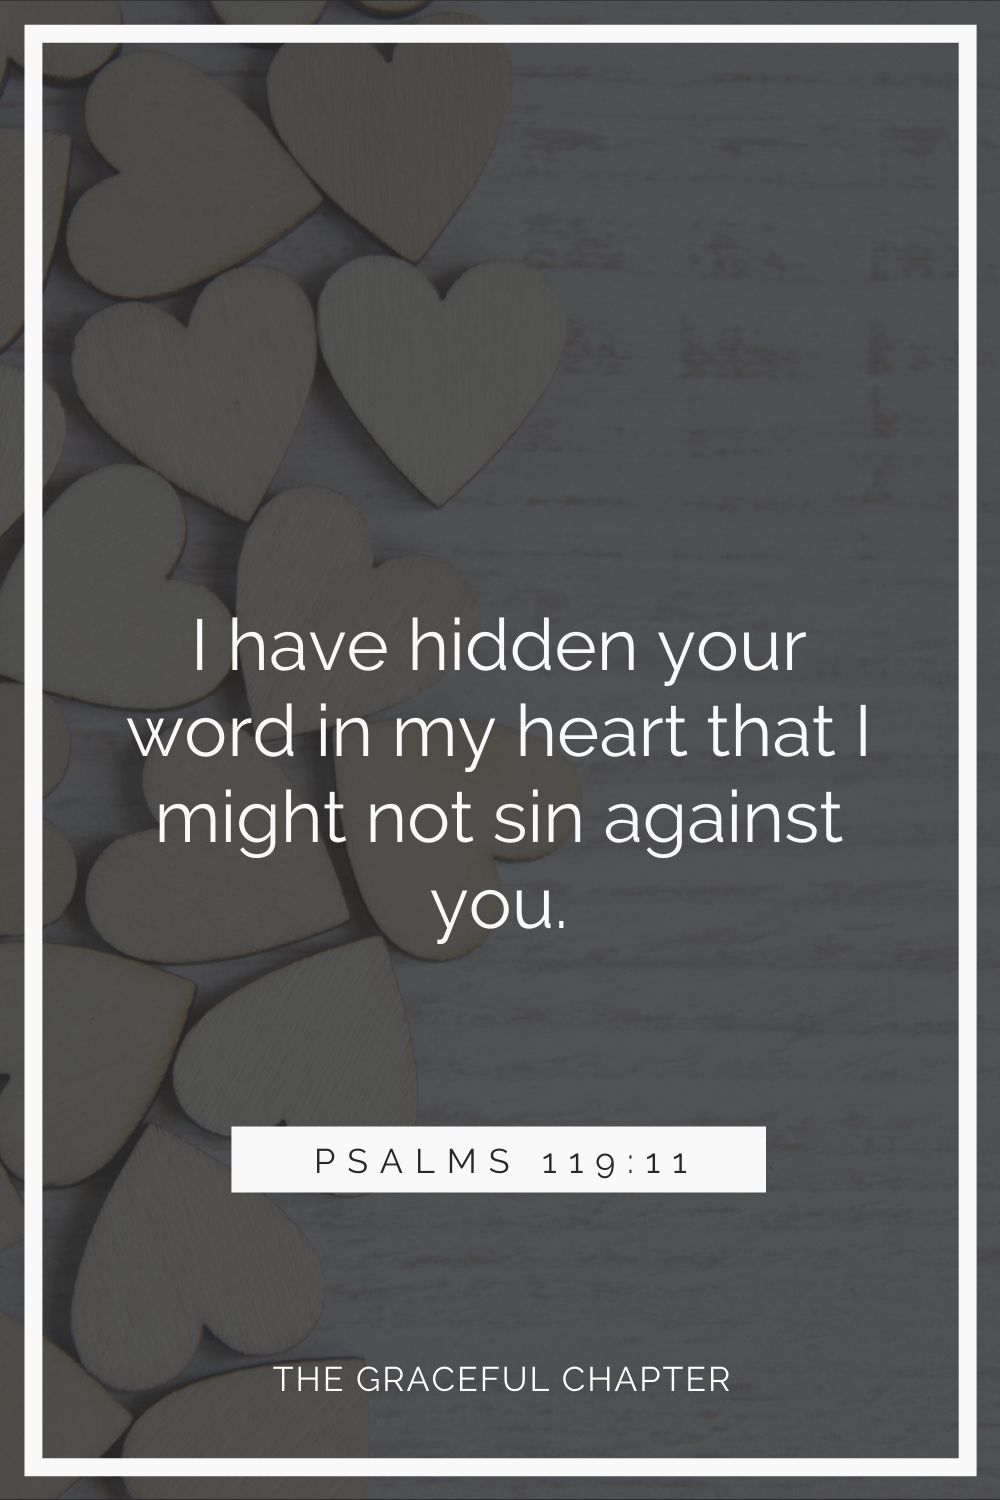 I have hidden your word in my heart that I might not sin against you. Psalms 119:11